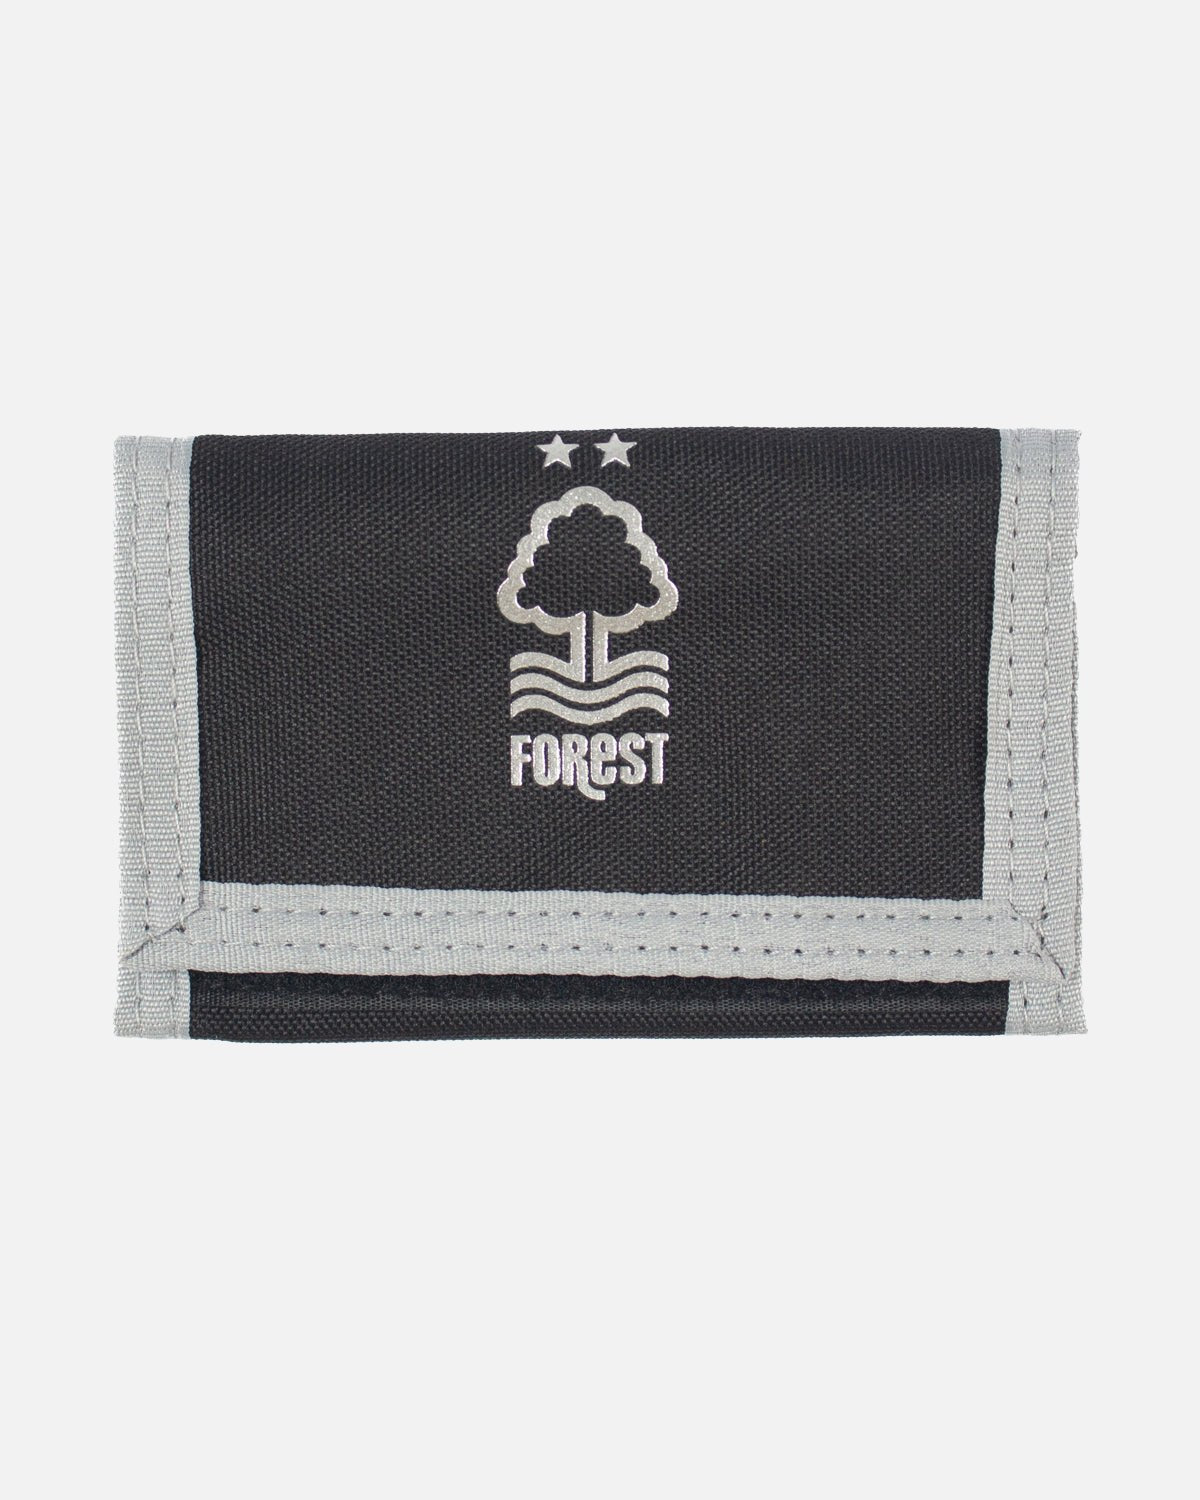 NFFC Recycled Ripper Wallet - Nottingham Forest FC